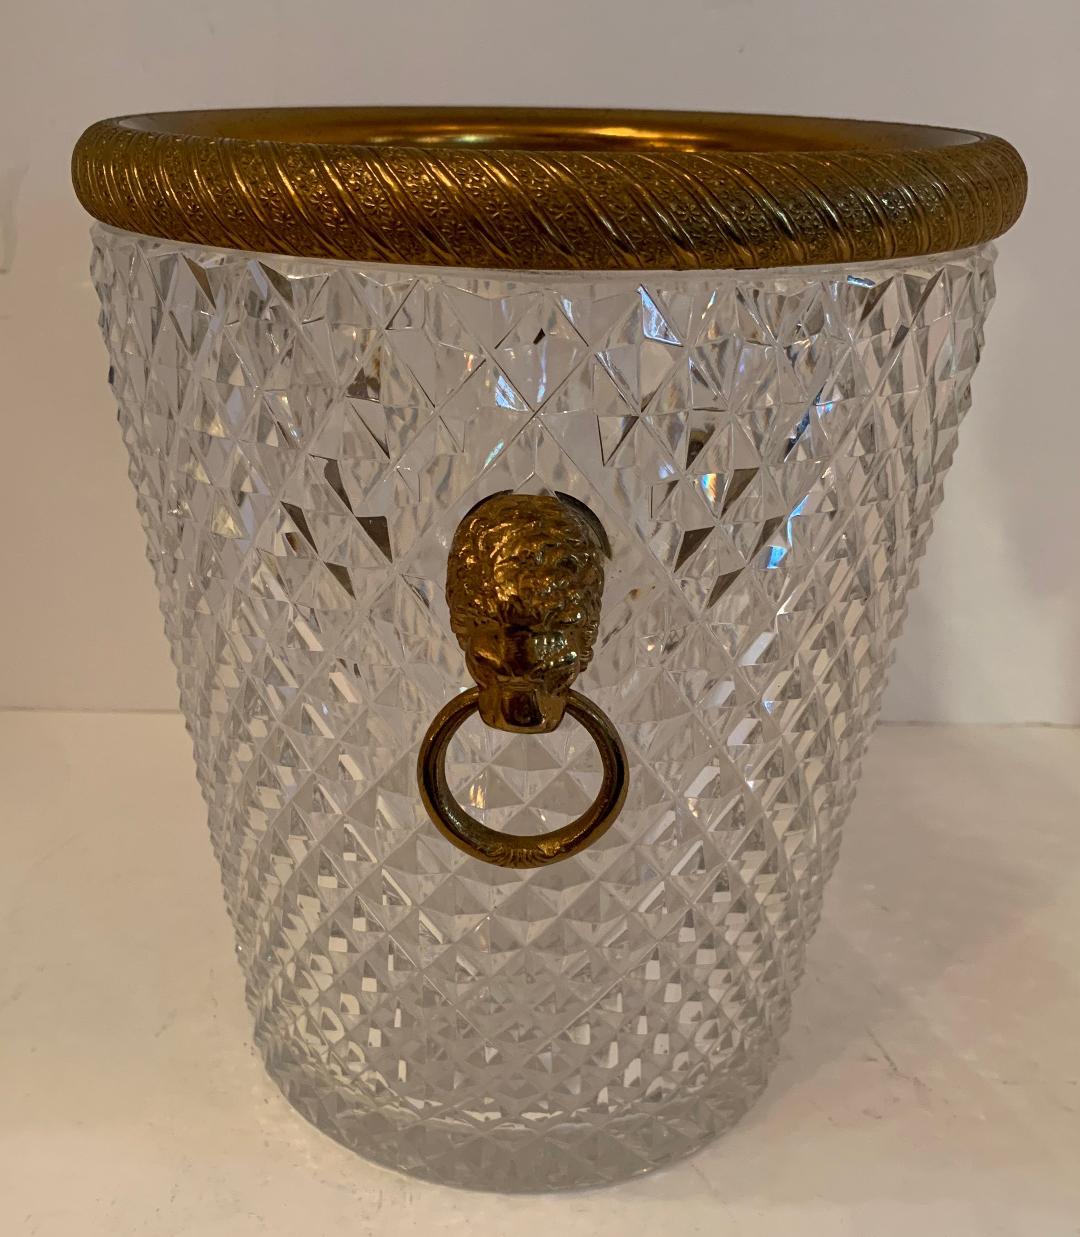 Elegant and very fine French neoclassical Baccarat style lion handle doré bronze ormolu-mounted and diamond cut crystal ice/champagne bucket.
Unsigned.